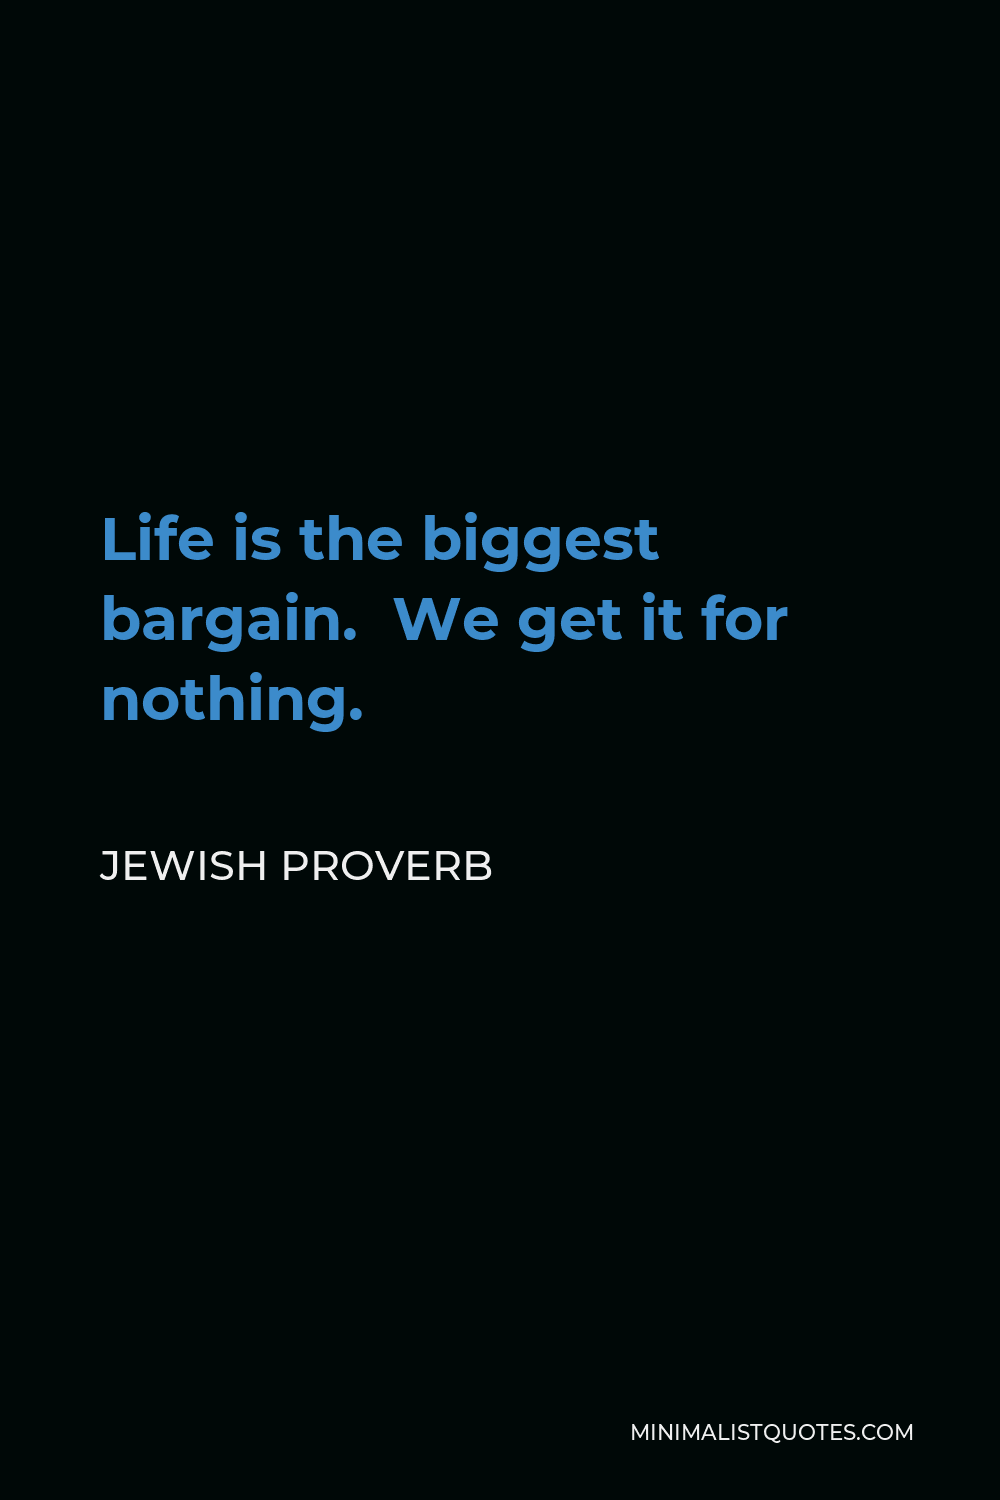 Jewish Proverb Quote - Life is the biggest bargain. We get it for nothing.